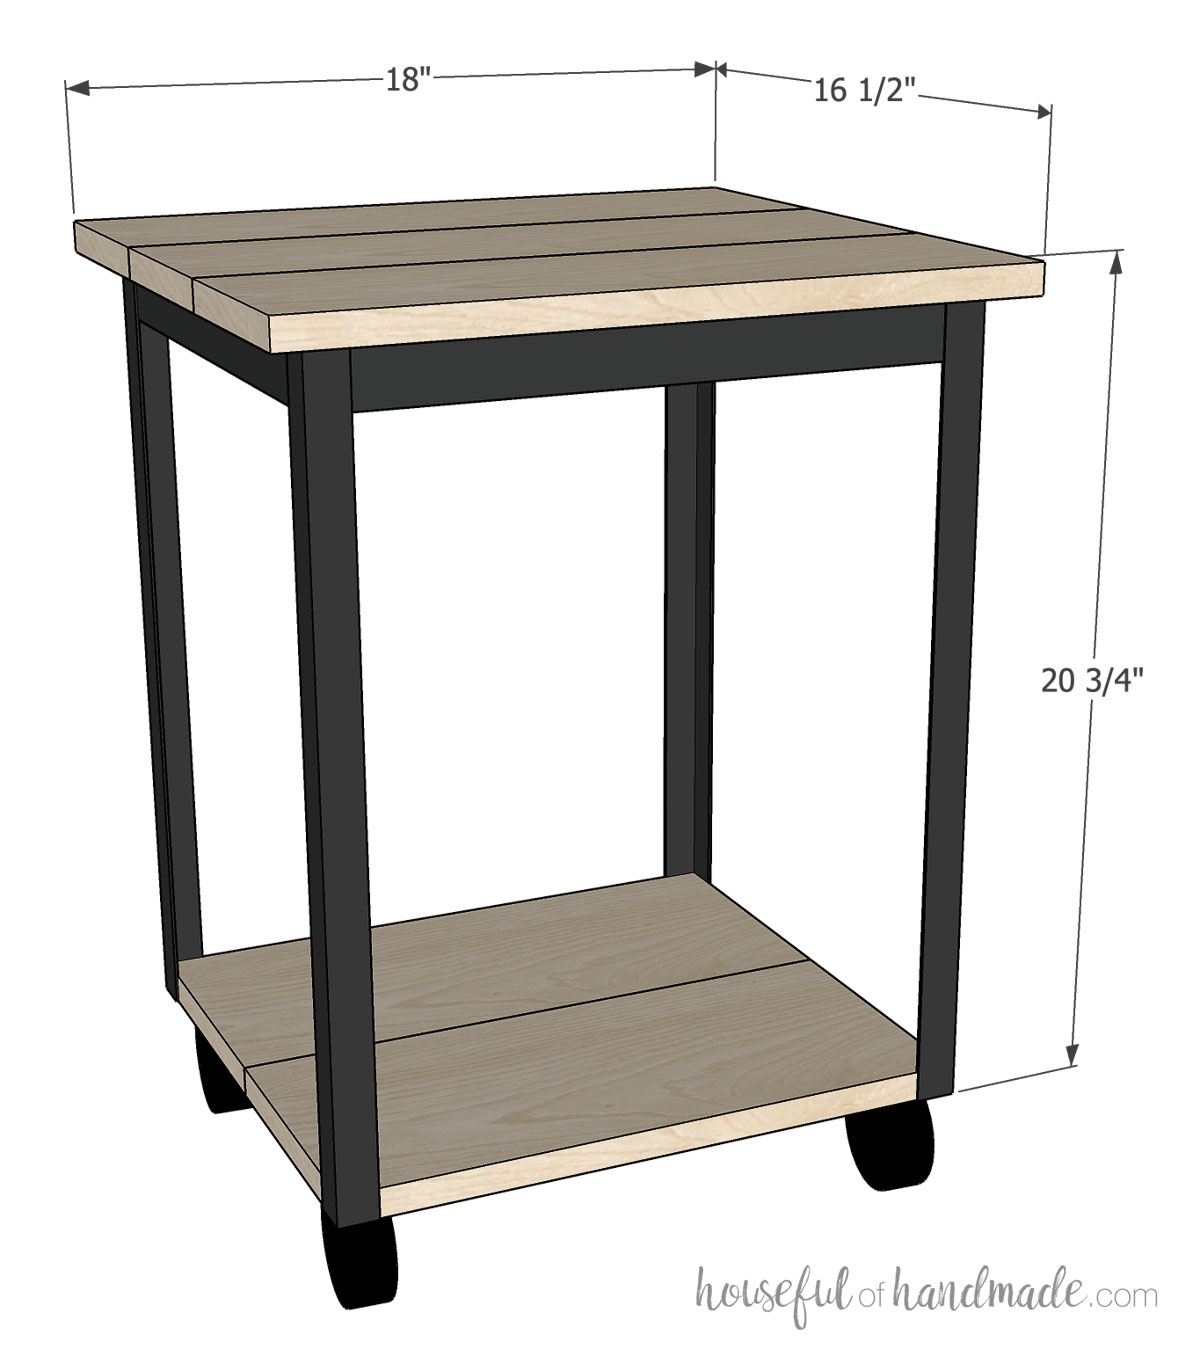 3D drawing of the small side table with dimensions noted. 